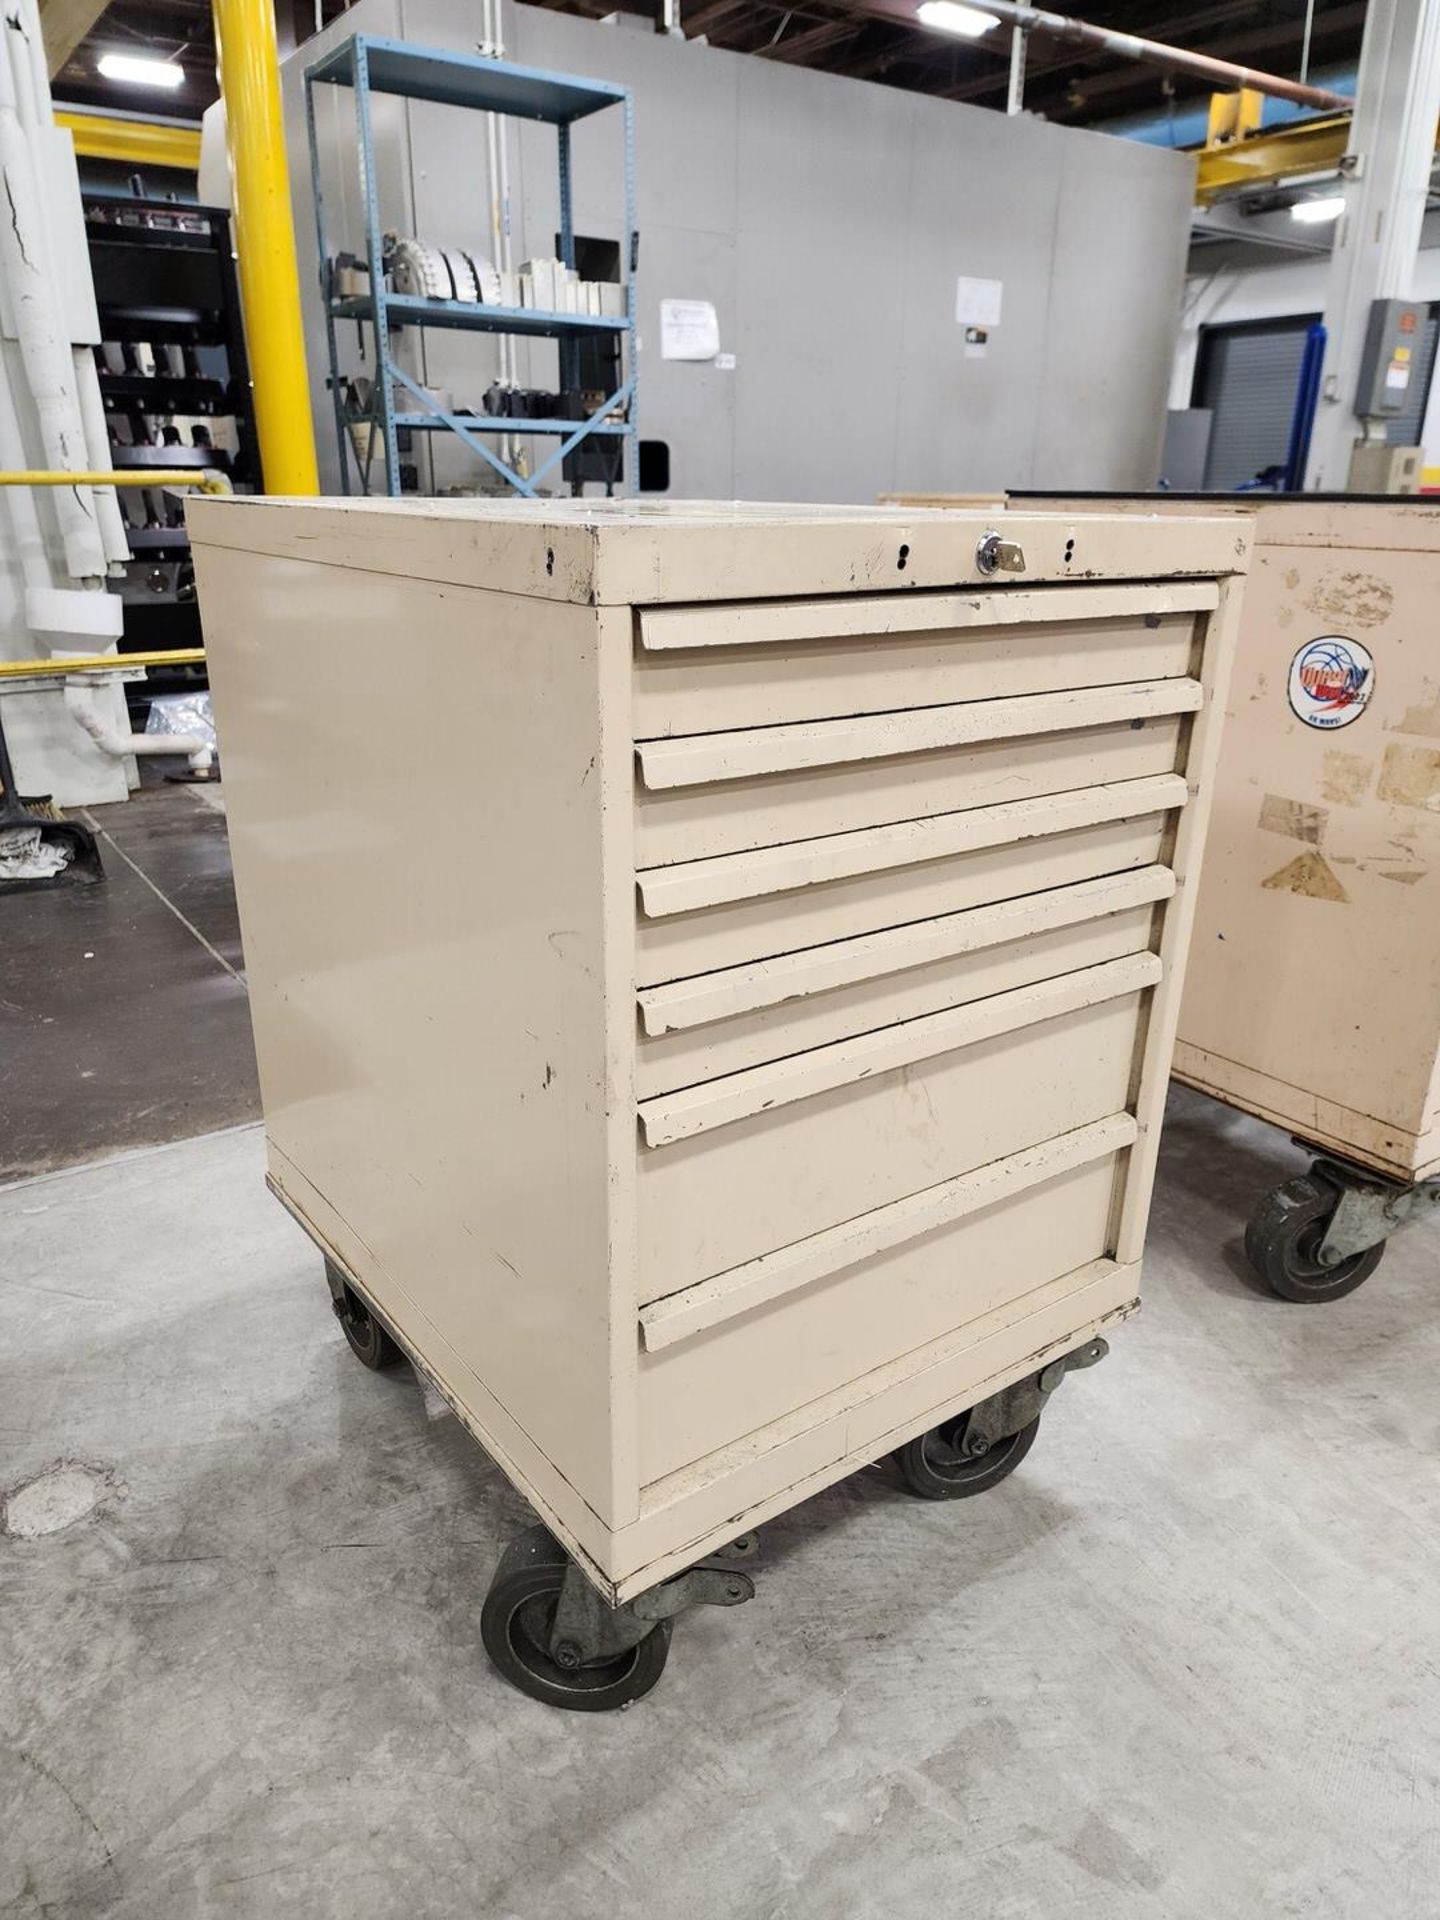 7-Drawer Rolling Modular Cabinet (Location: Machine Room) - Image 3 of 3